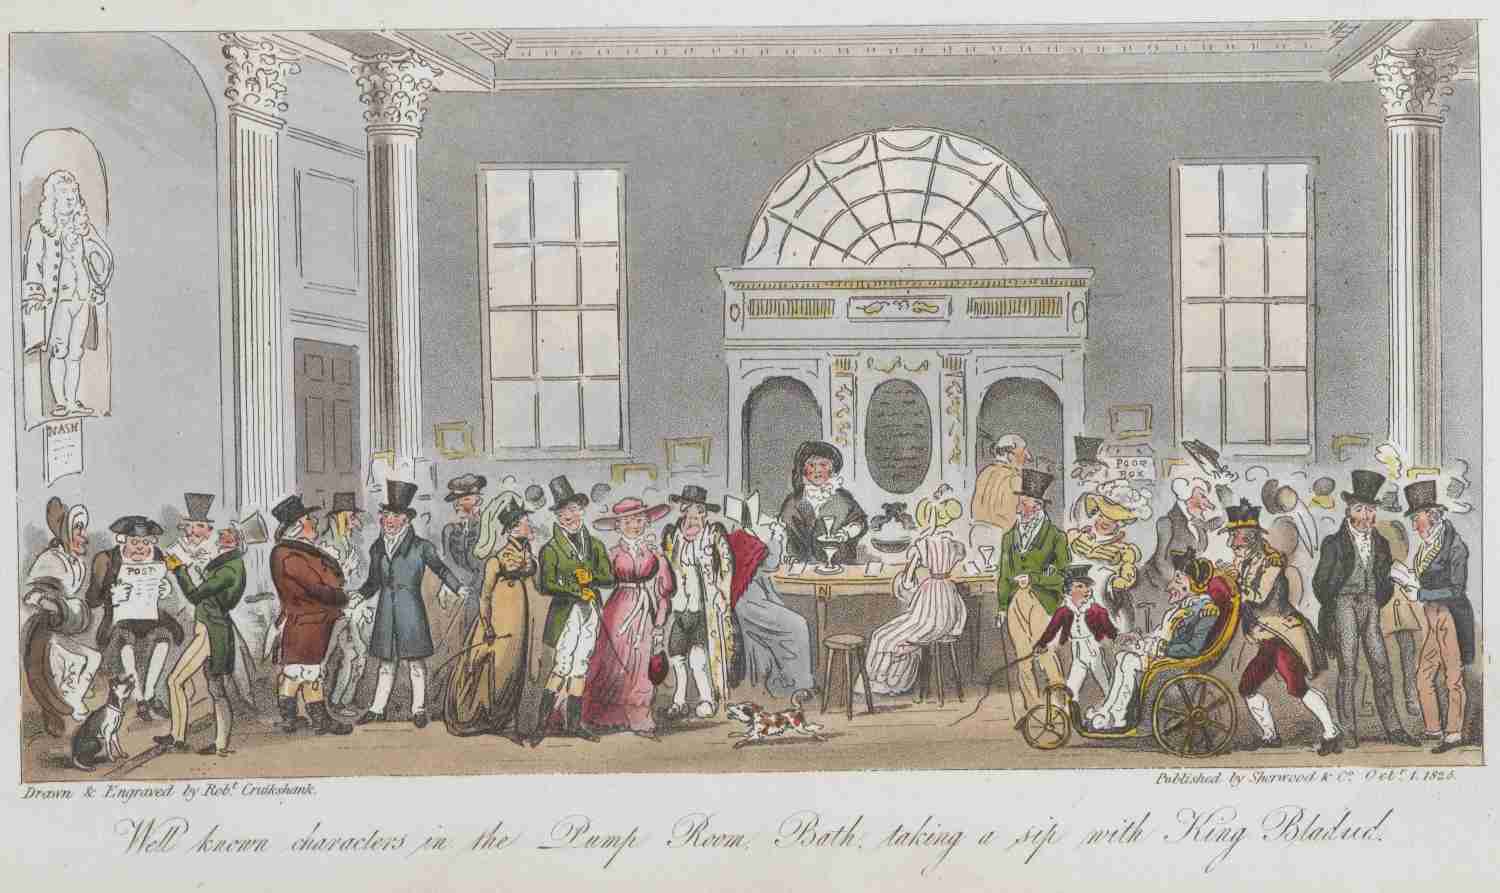 'Well known characters in the pump room, Bath, taking a sip with King Bladud'. A large crowd of people drinking and talking. Bladud was the legendary founder of Bath.